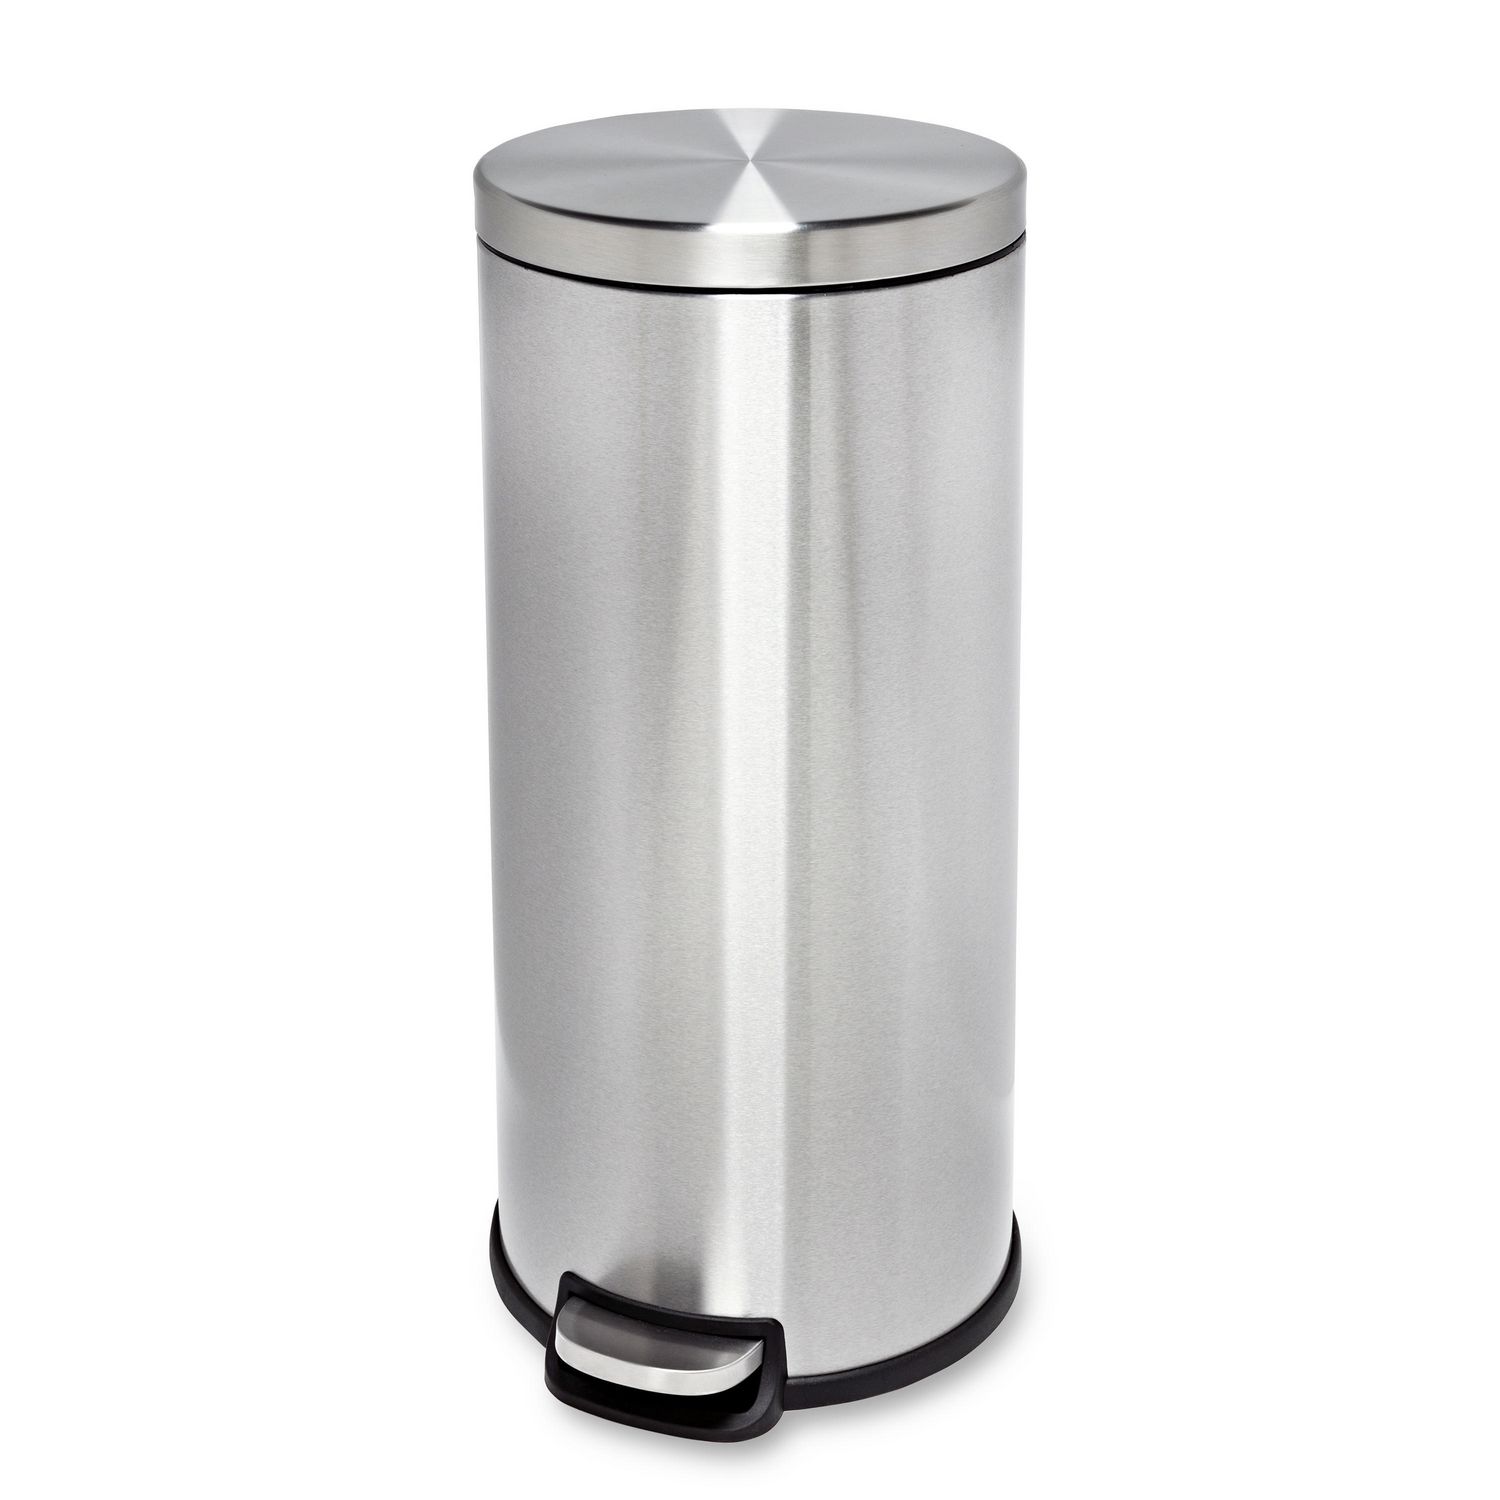 30L Stainless Steel Step Trash Can | Walmart Canada 30l Stainless Steel Trash Can